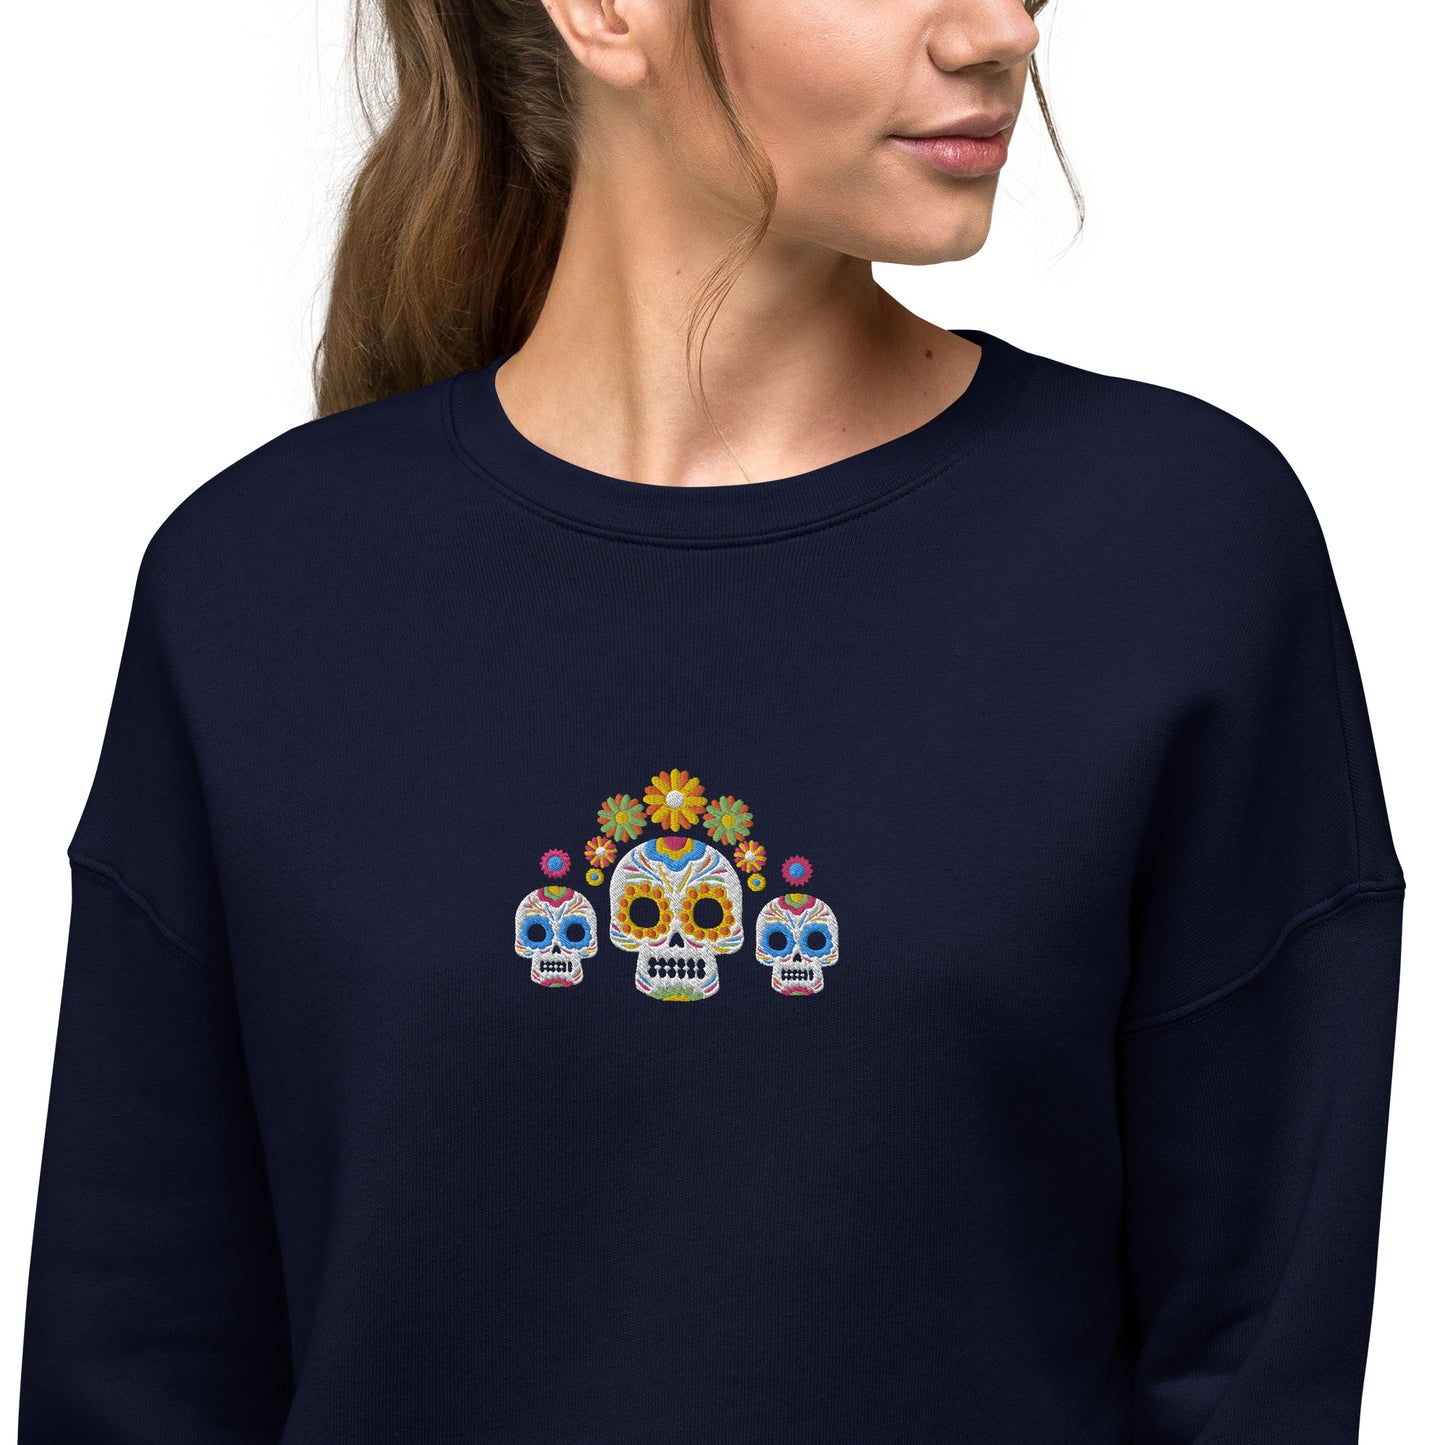 Mexican Day of the Dead Cropped Sweatshirt - Embroidered - The Global Wanderer